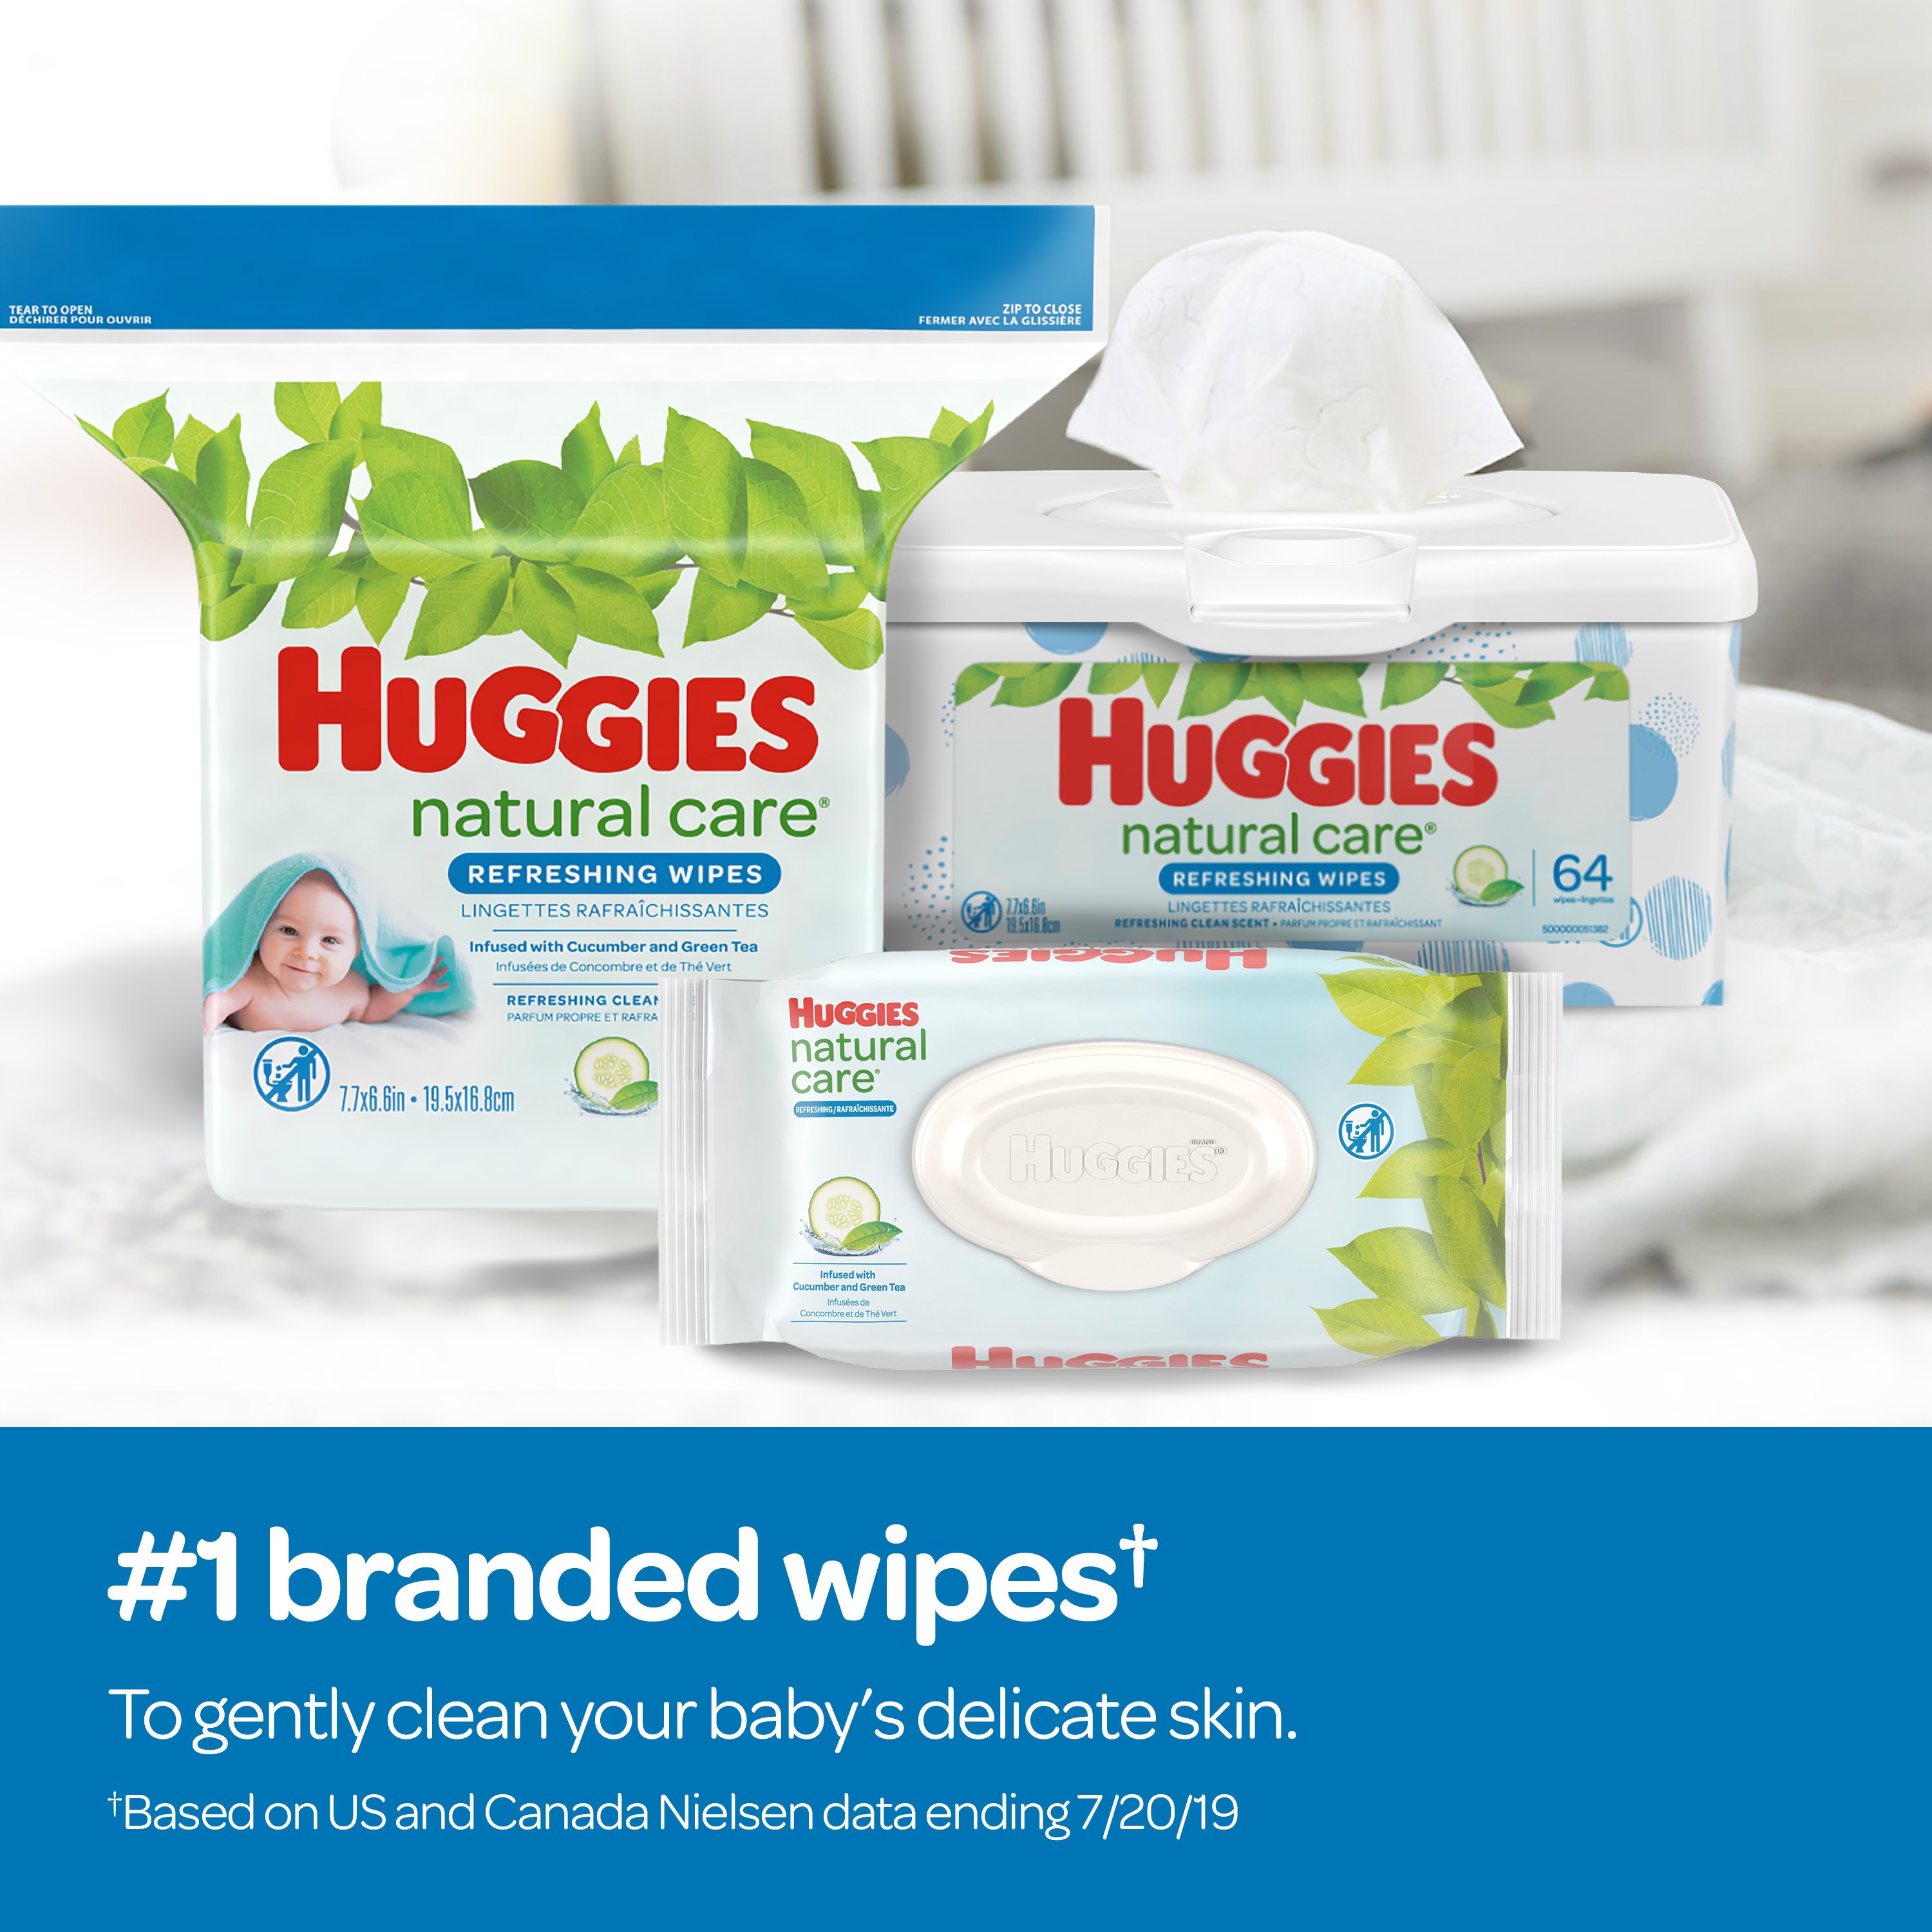 HUGGIES Refreshing Clean Baby Wipes, Disposable Soft Pack (6-Pack, 288 Sheets Total), Scented, Alcohol-free, Hypoallergenic - image 3 of 8